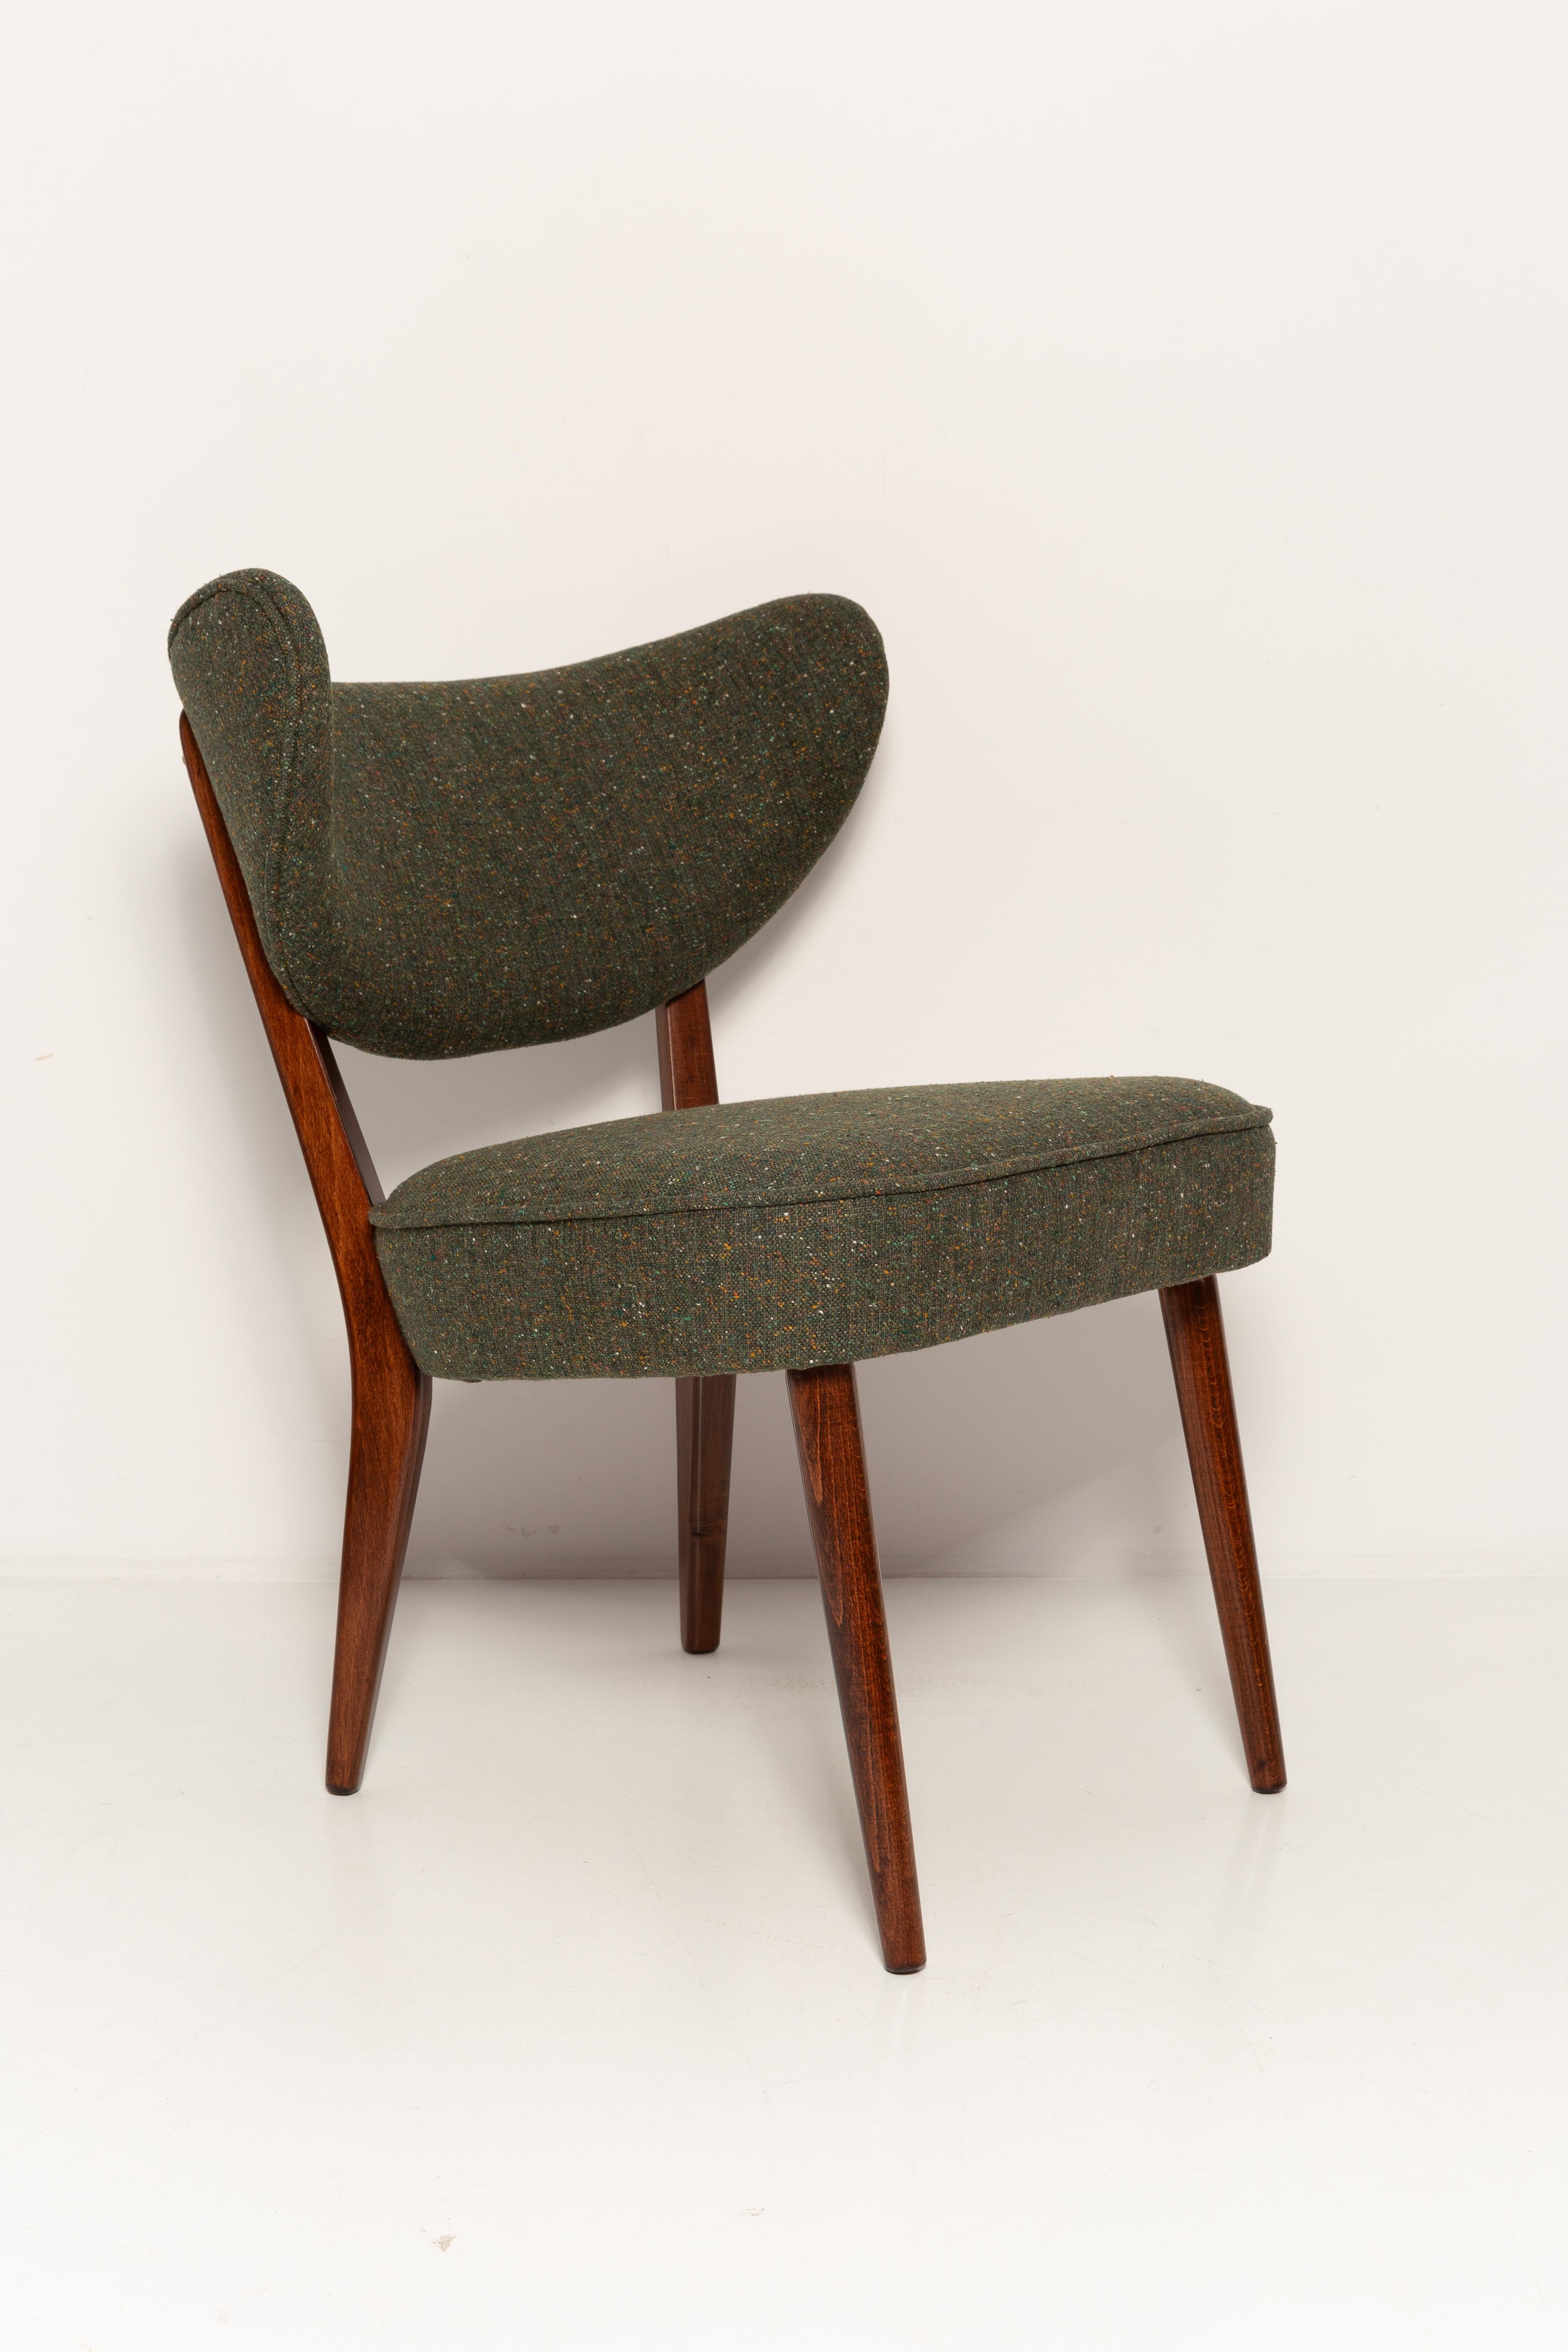 Contemporary Pair of Green Wool Shell Club Chairs, by Vintola Studio, Europe, Poland For Sale